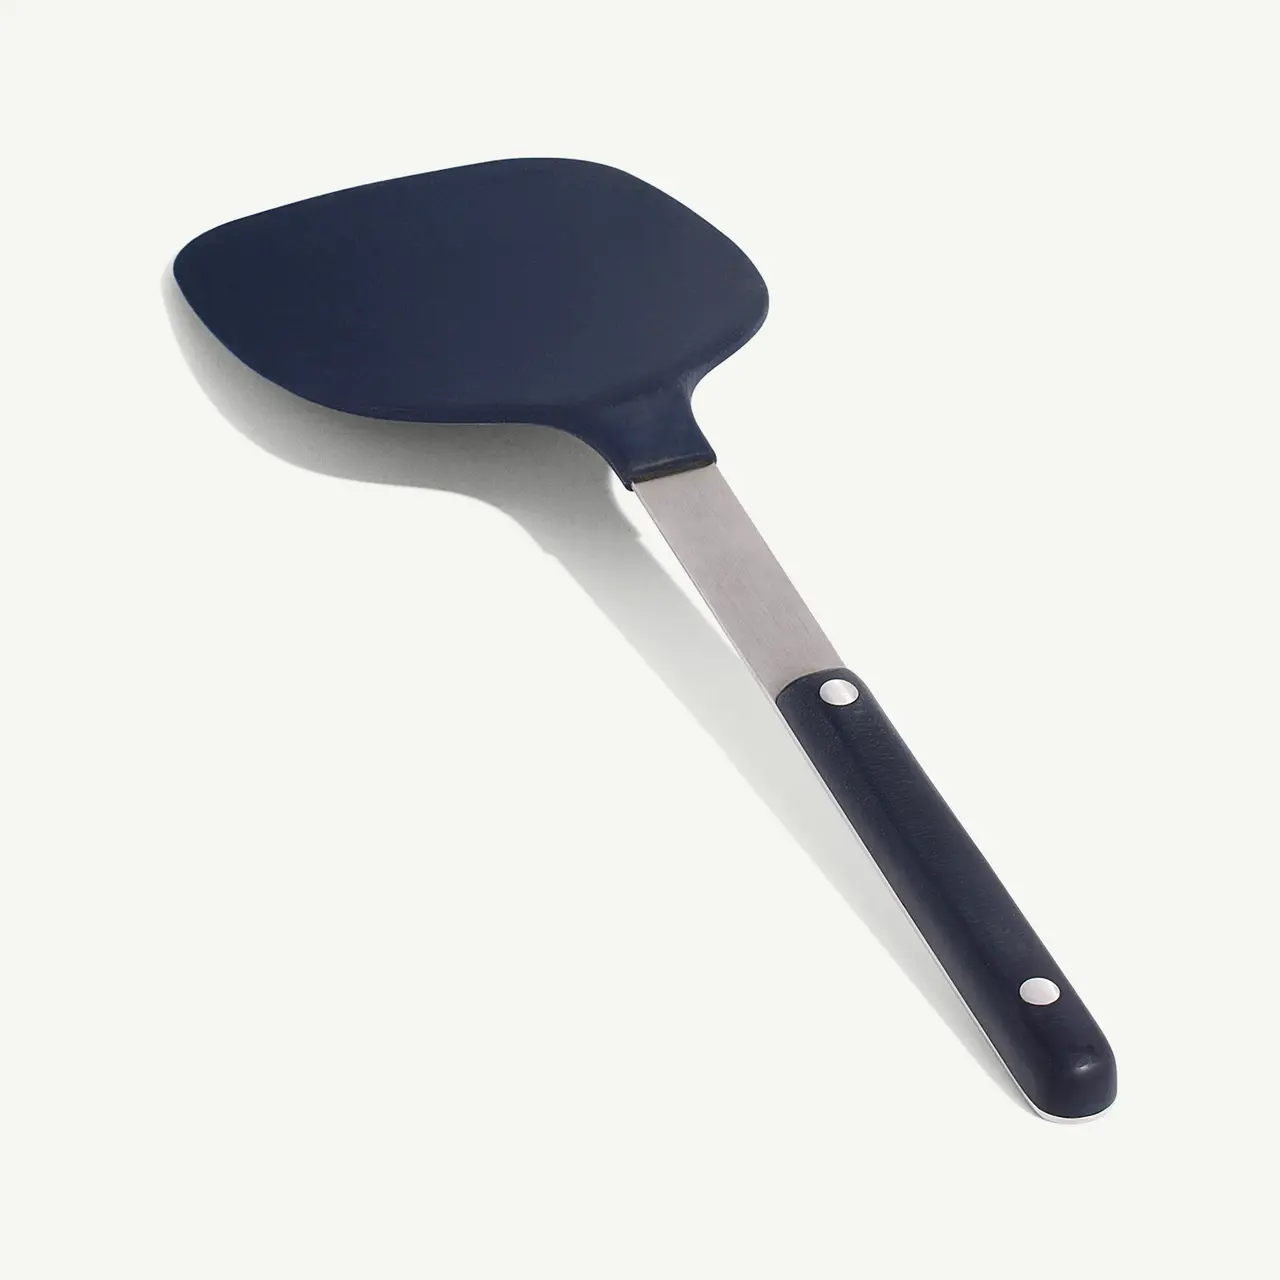 A black spatula with a stainless steel handle and rivets lies against a white background.